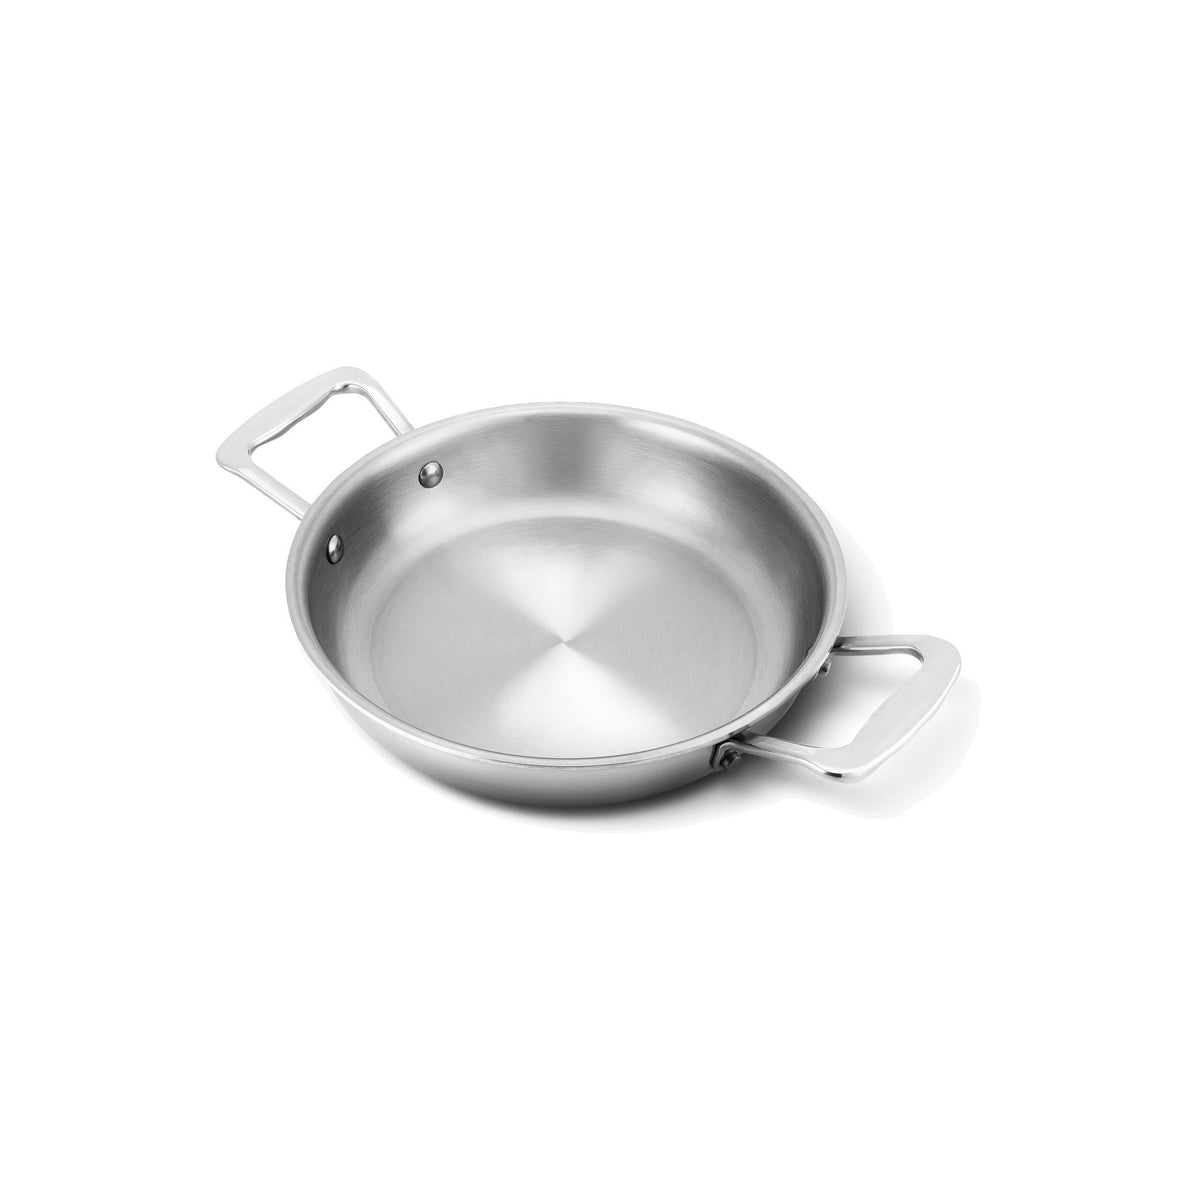 360 Cookware - Liberty Tabletop - Cookware Made in the USA